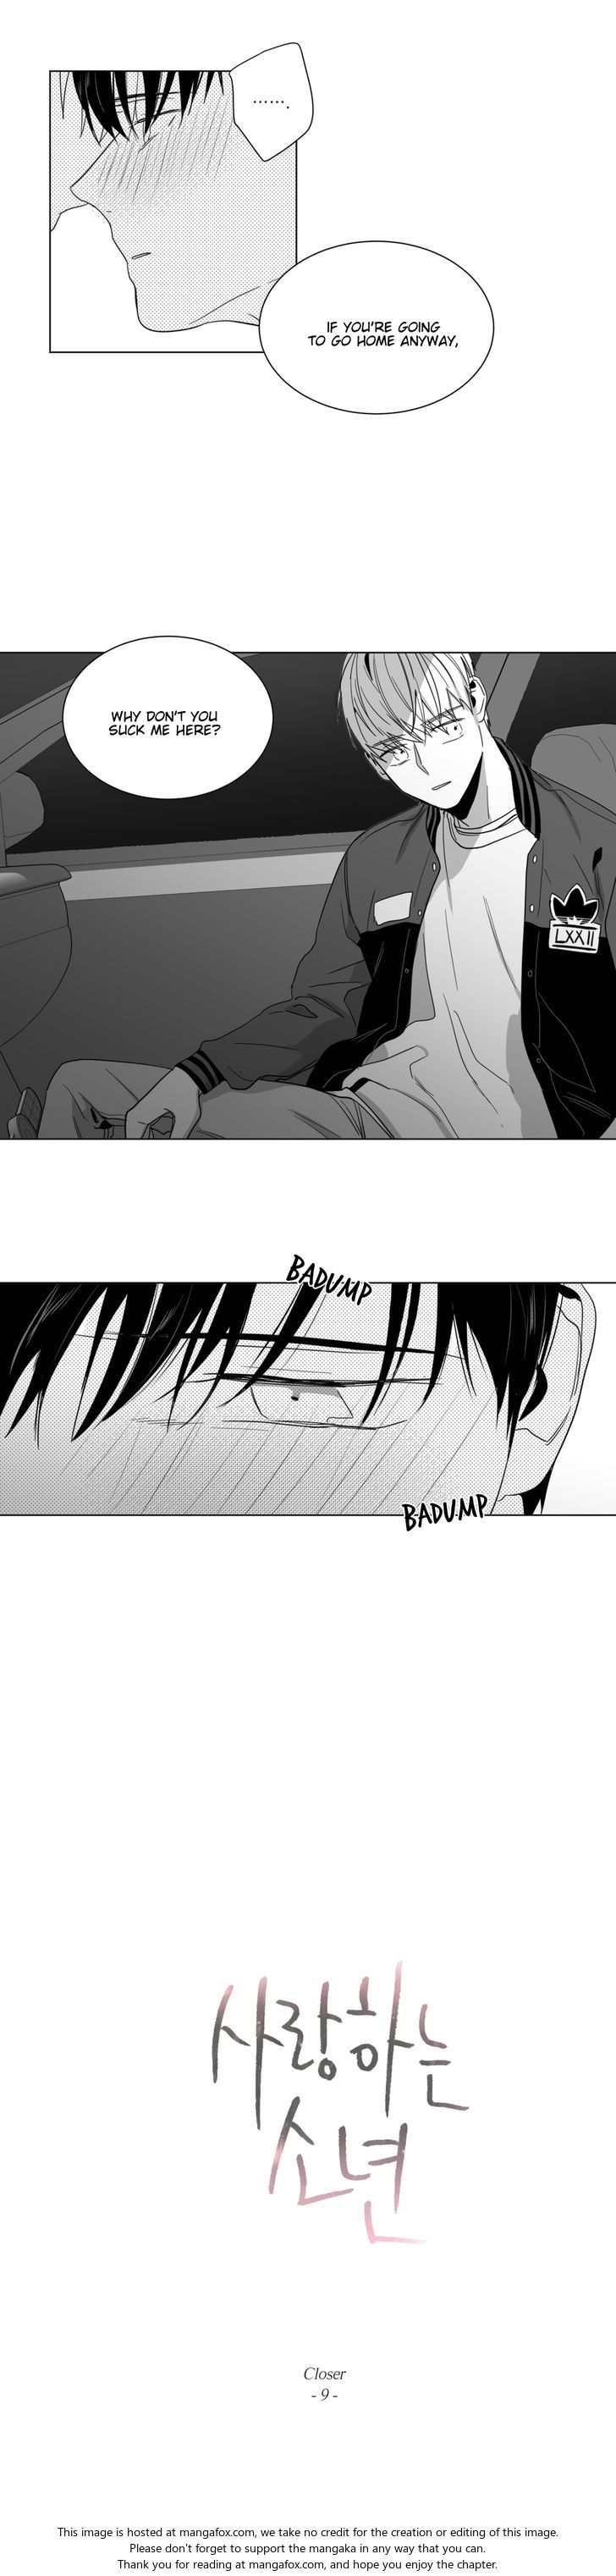 Lover Boy (Lezhin) Chapter 026 page 4